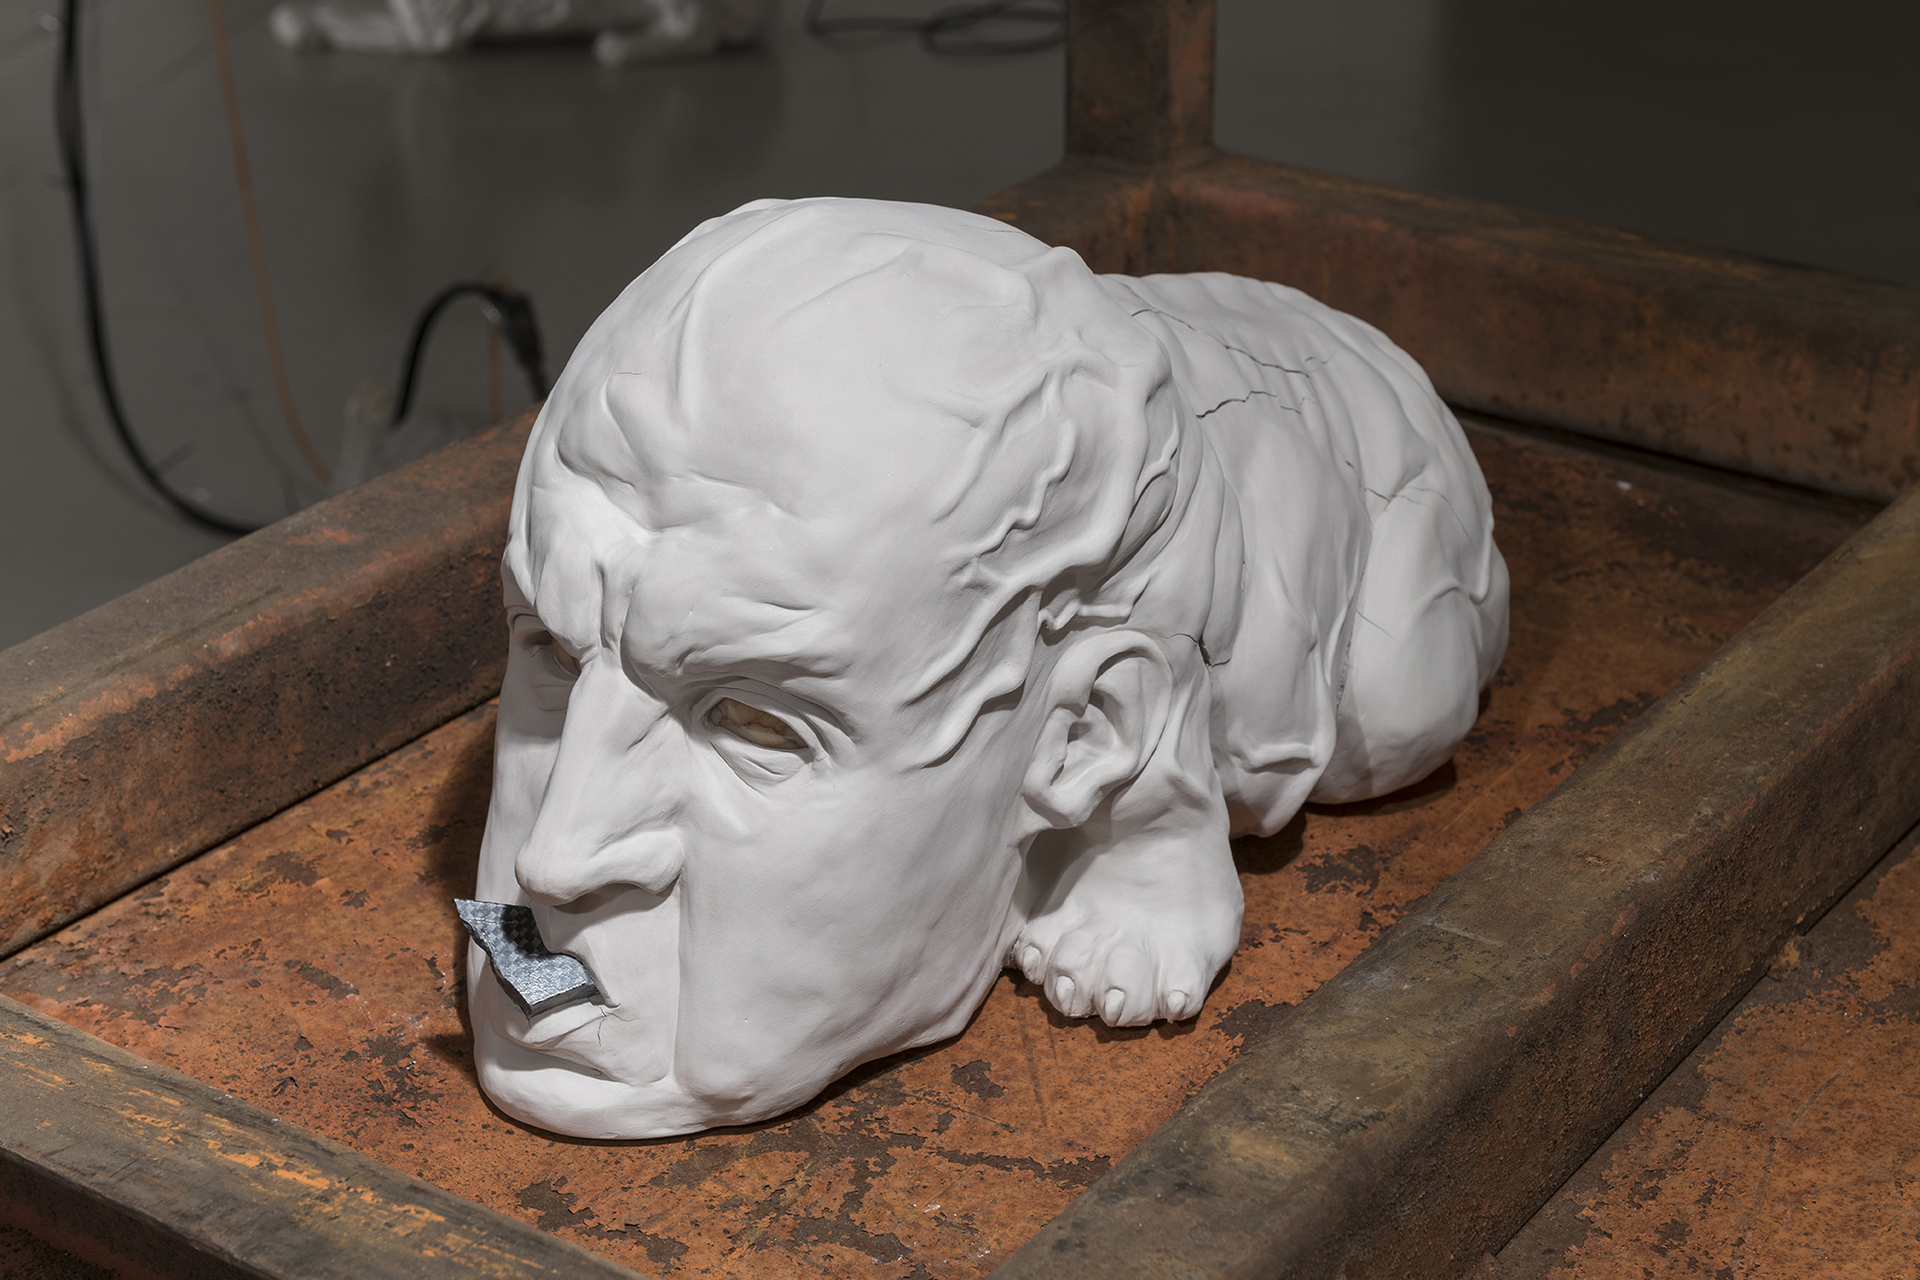 Guillermo Ros, Perro creador, 2020, Ceramic paste, marble, hydro printing and exhaust pipes